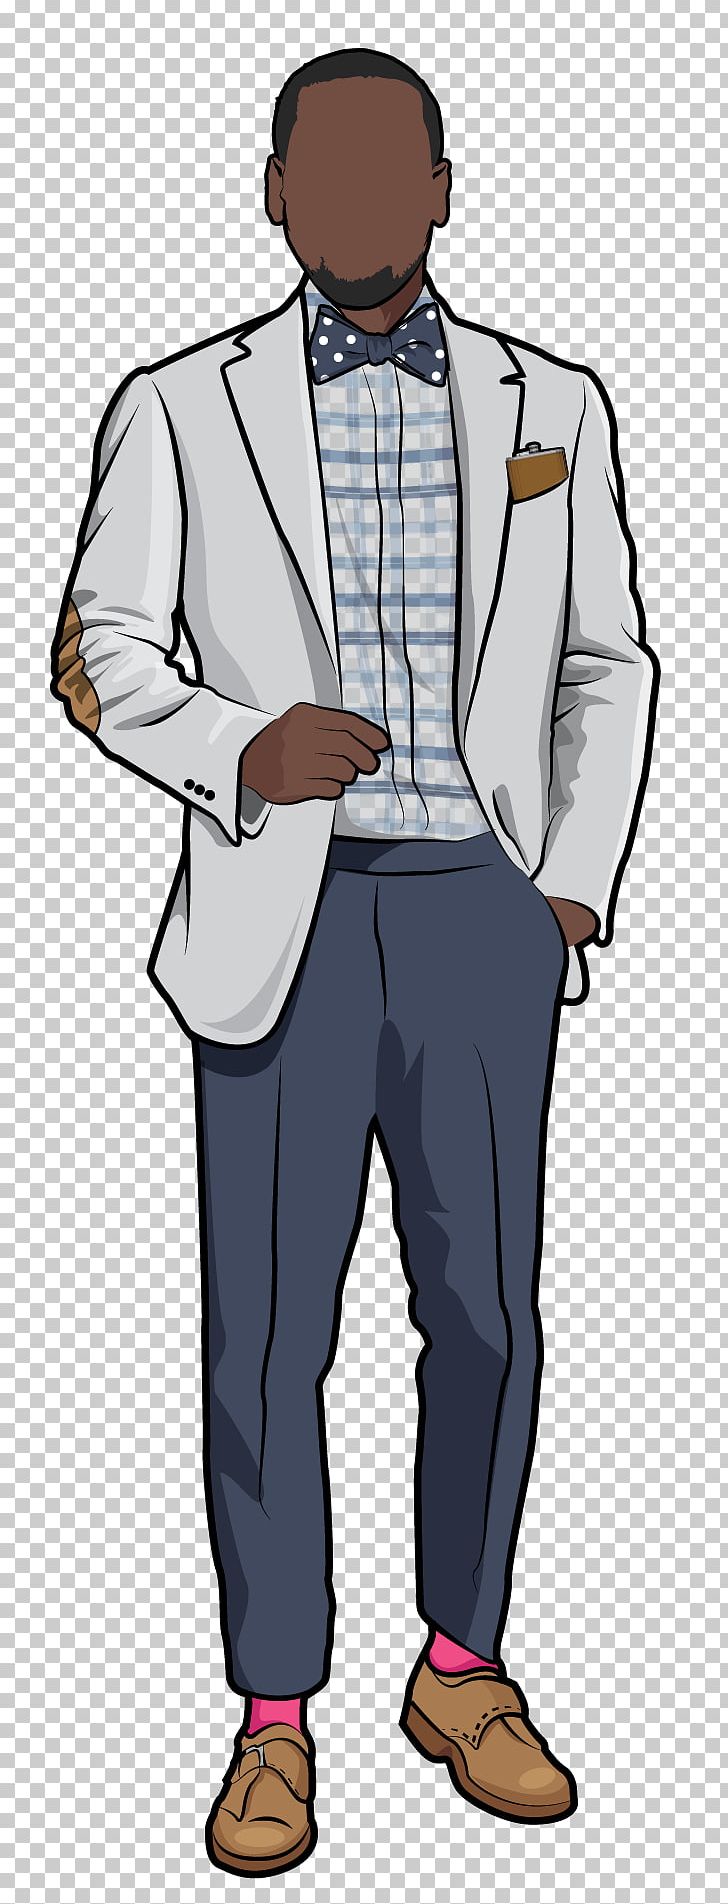 Dress Code Smart Casual Clothing PNG, Clipart, Business Casual, Casual, Clothing, Cocktail Dress, Cool Free PNG Download